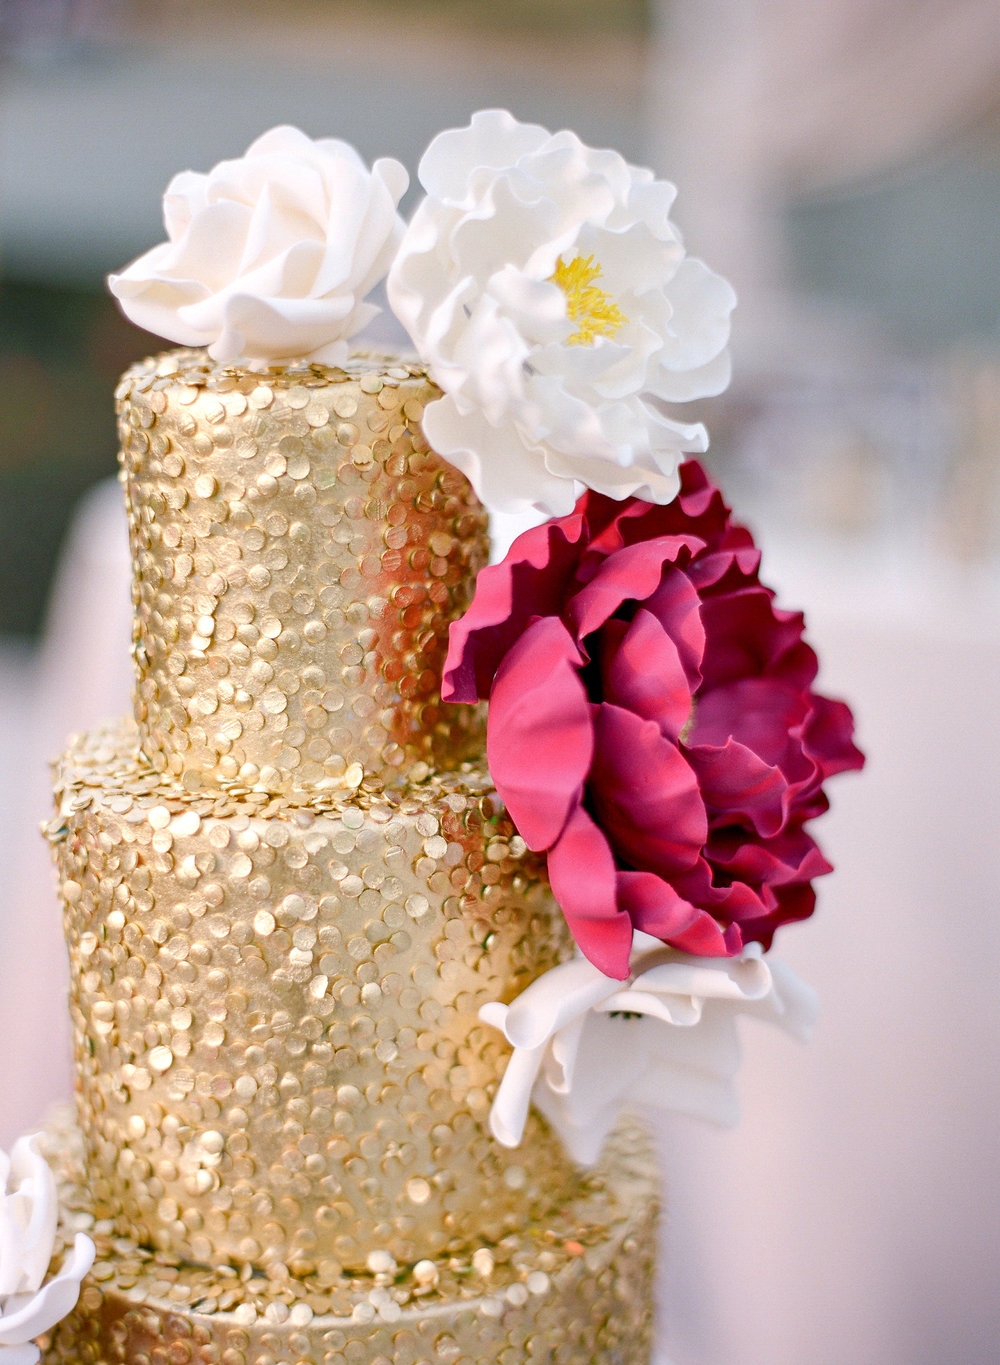 Amador_County_Wedding_Cake_Gold_Red_White_Flowers_Sparkles_Rancho_Victoria_Vineyard_Northern_California.jpg